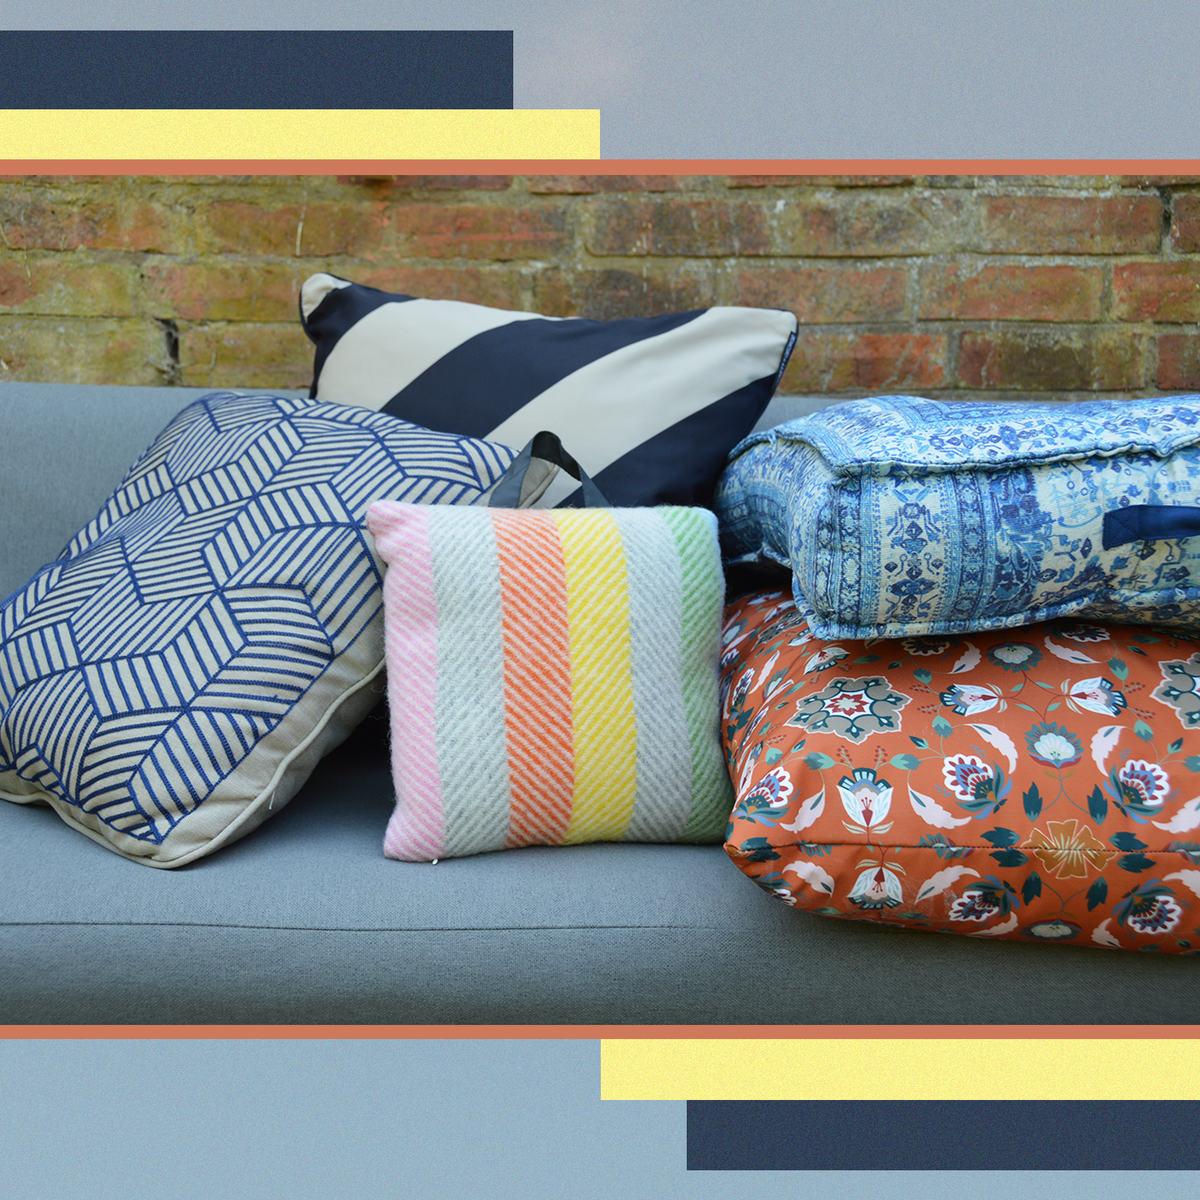 https://static.independent.co.uk/2023/06/16/15/outdoor%20cushions.png?width=1200&height=1200&fit=crop